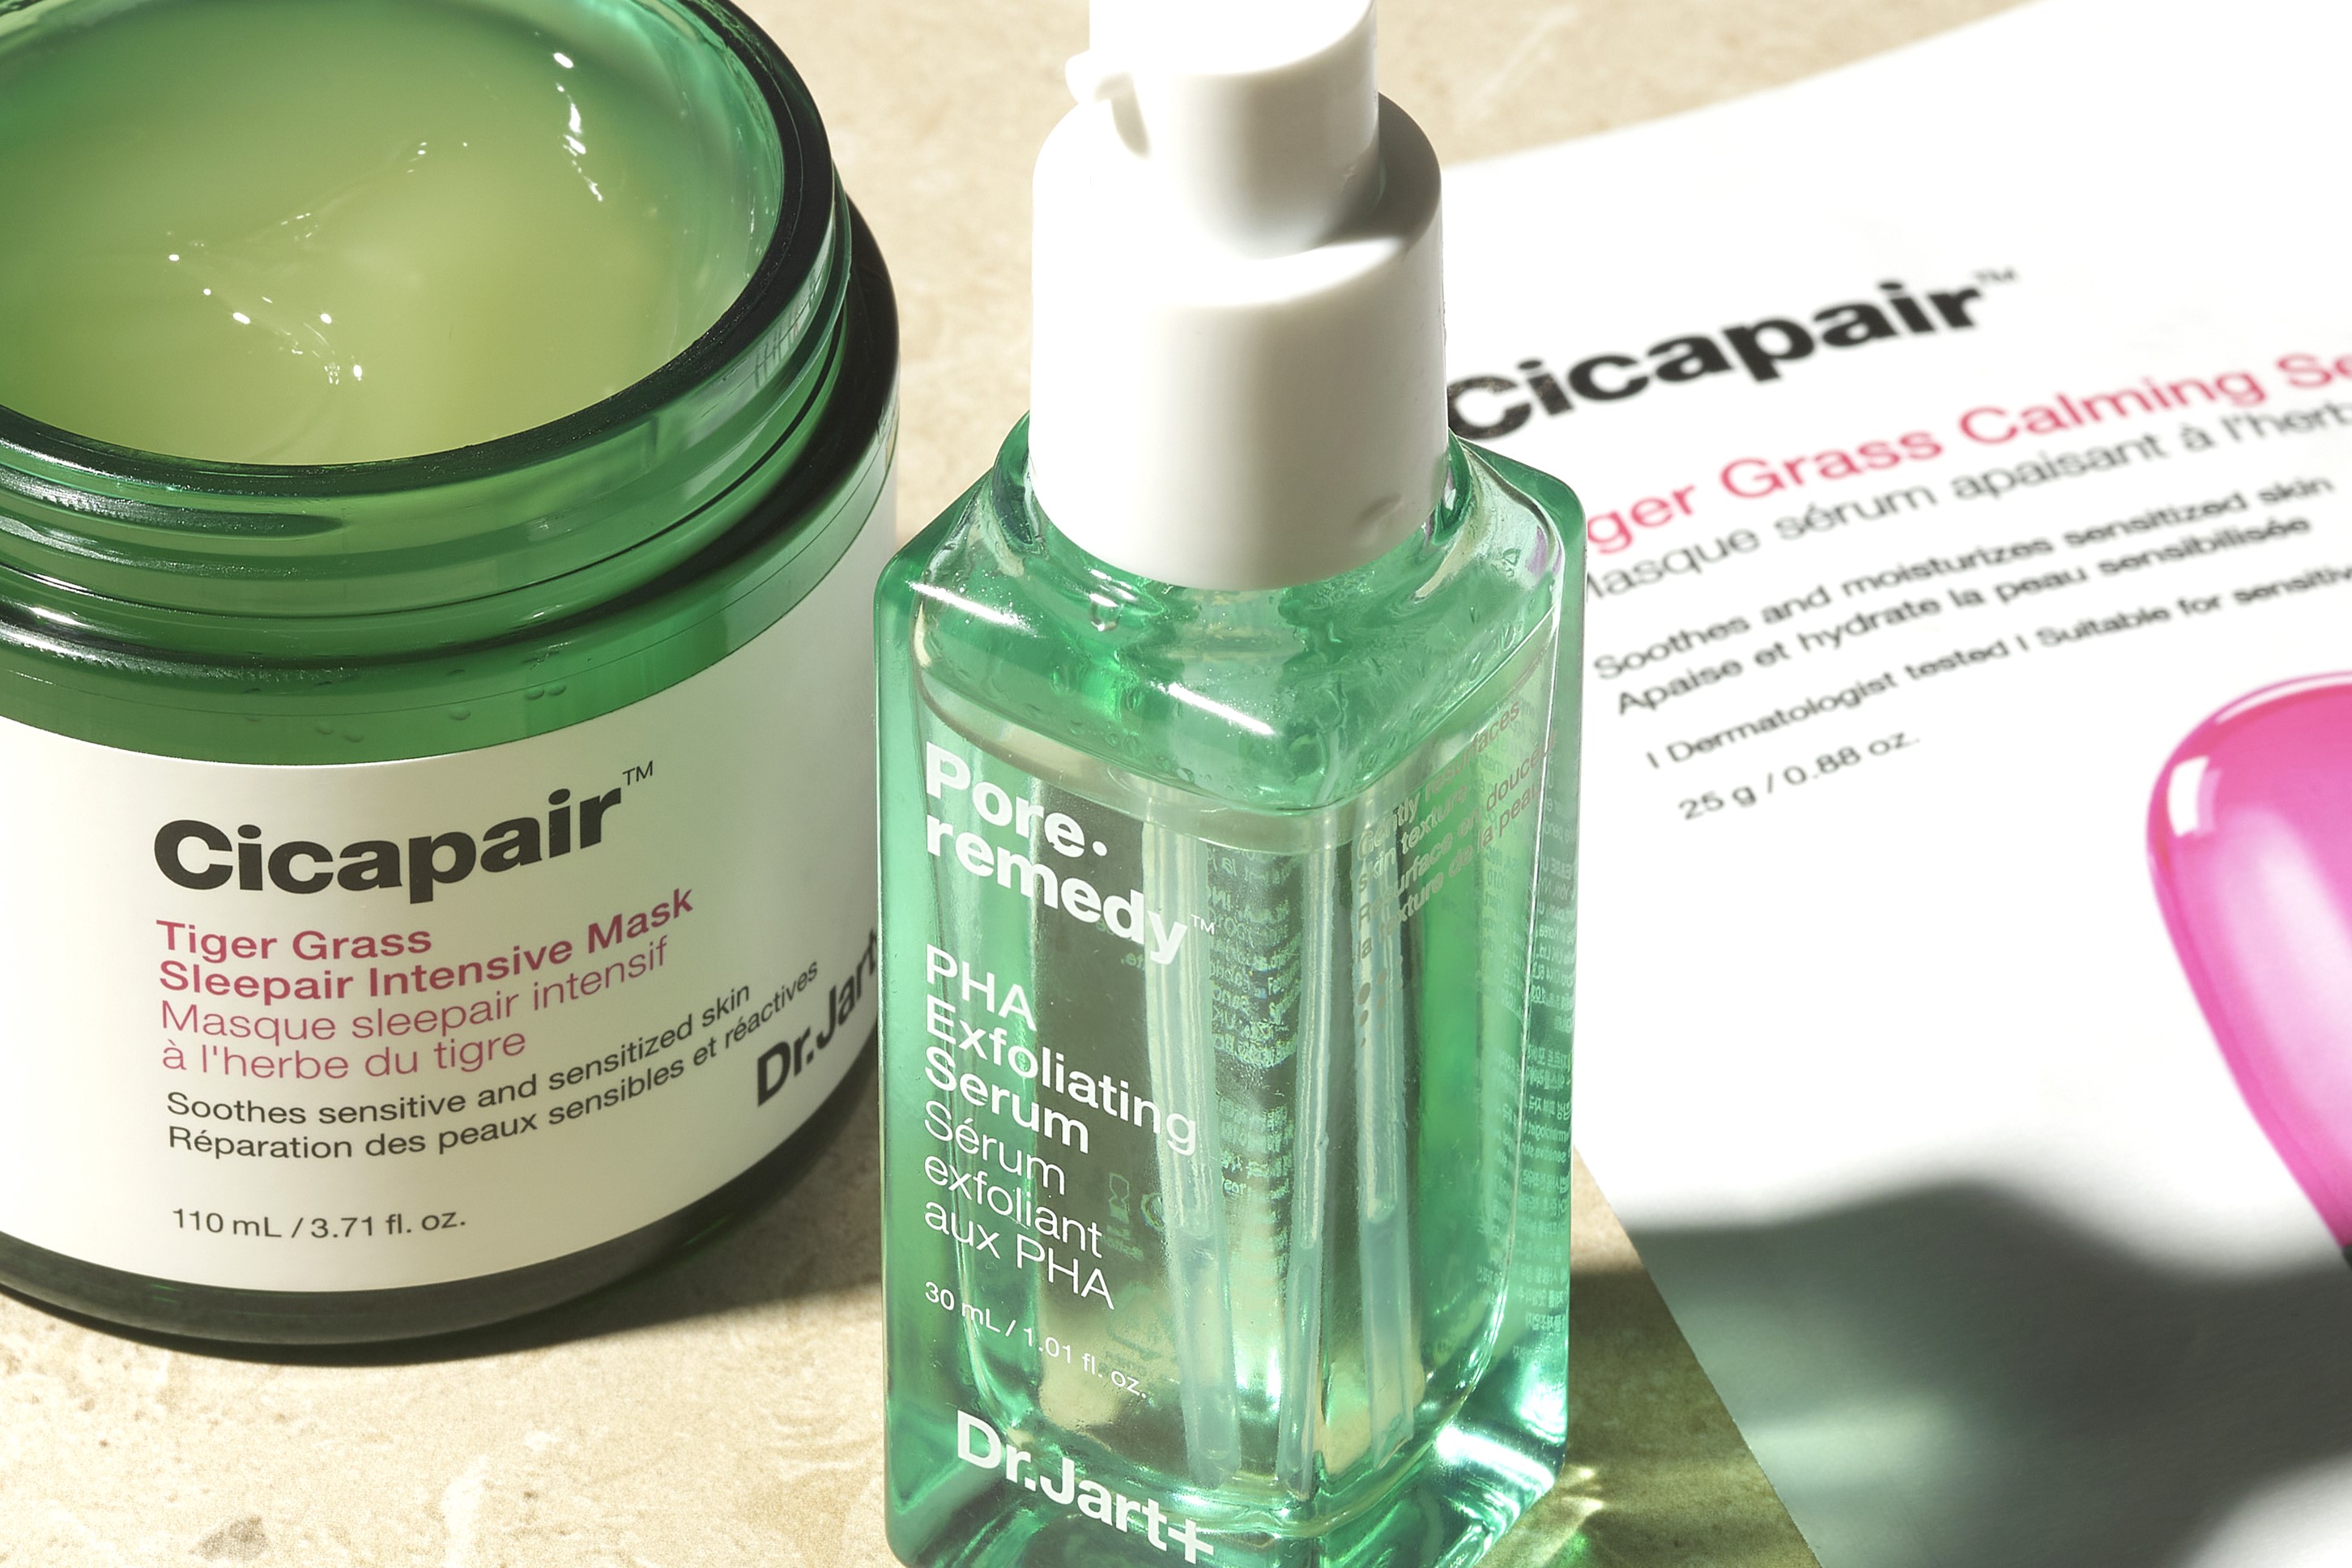 5 Dr Jart+ Products to Have in your Skincare Routine